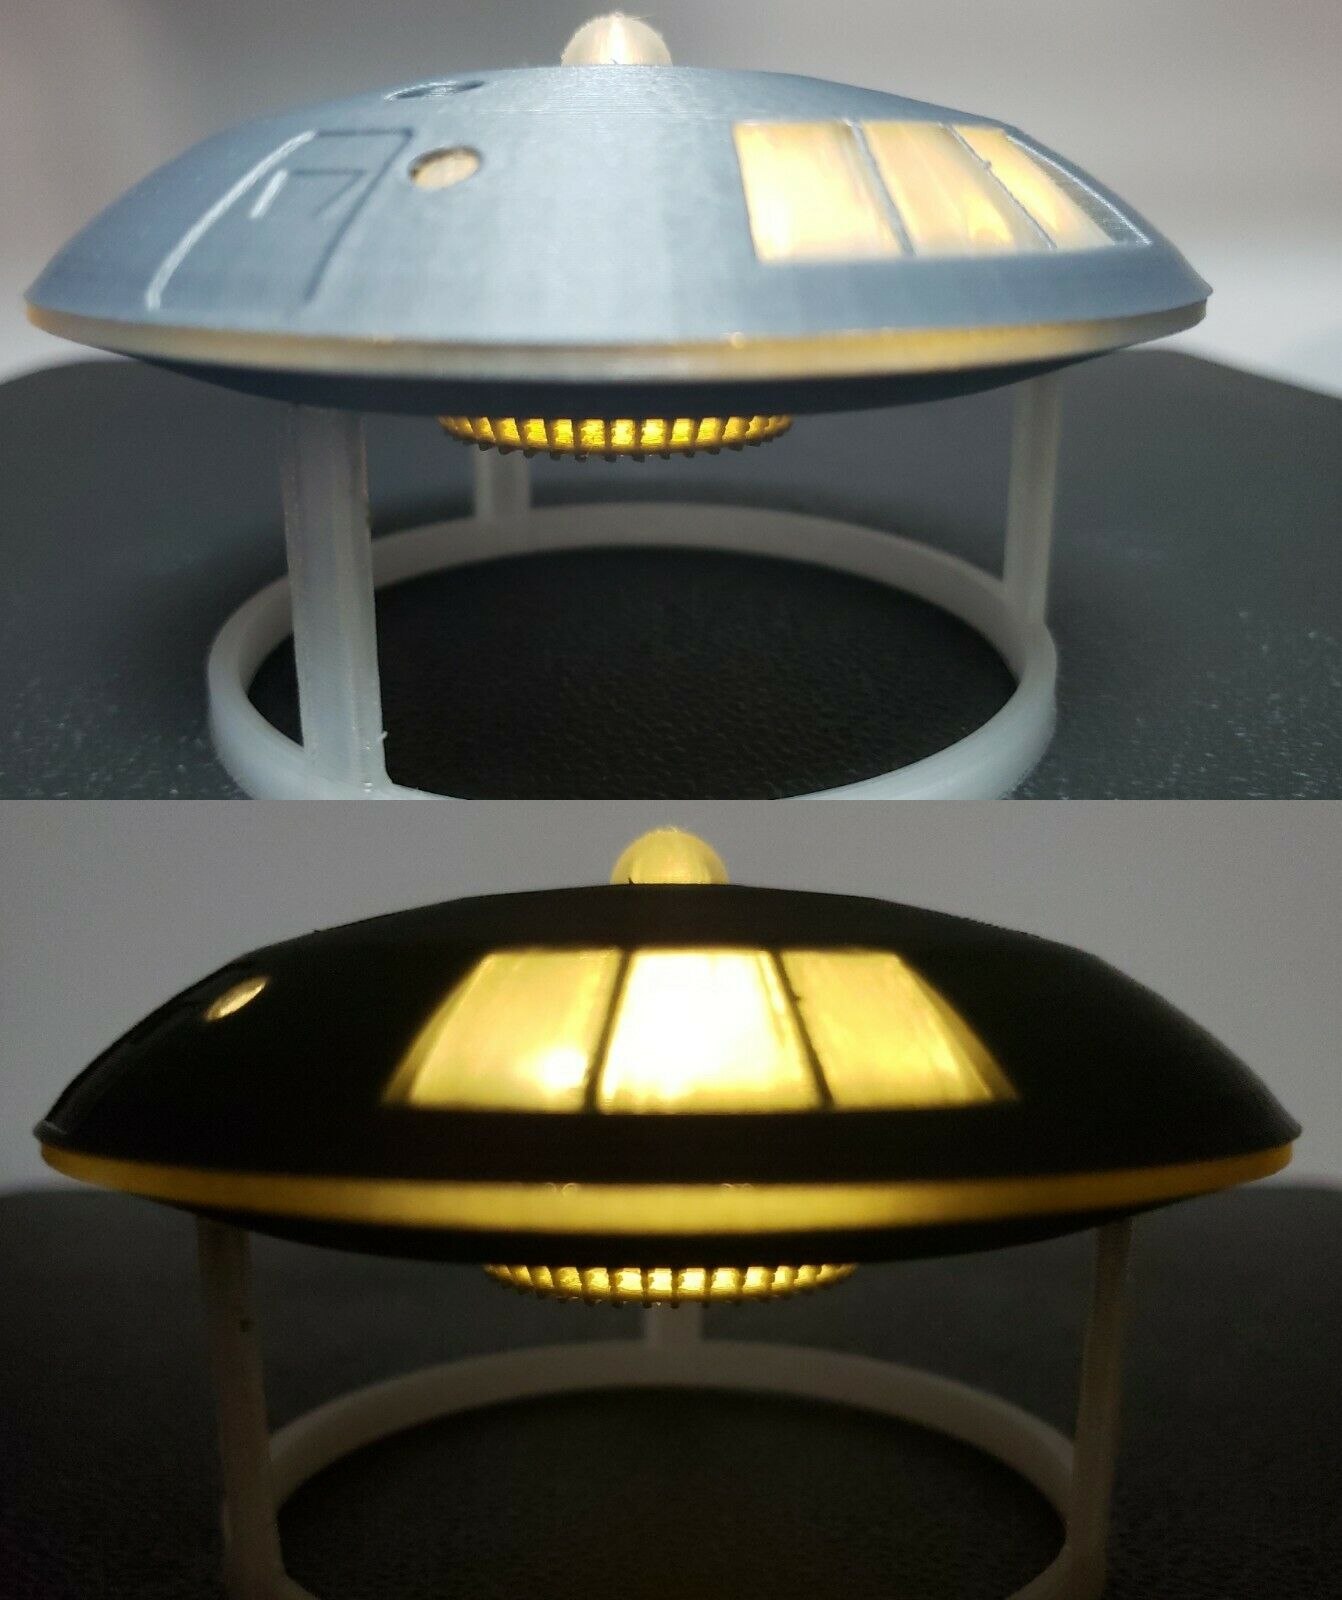 Jupiter 2 [Lost in Space]- In Flight w/ Light & Stand- small (Flying Saucer/UFO)